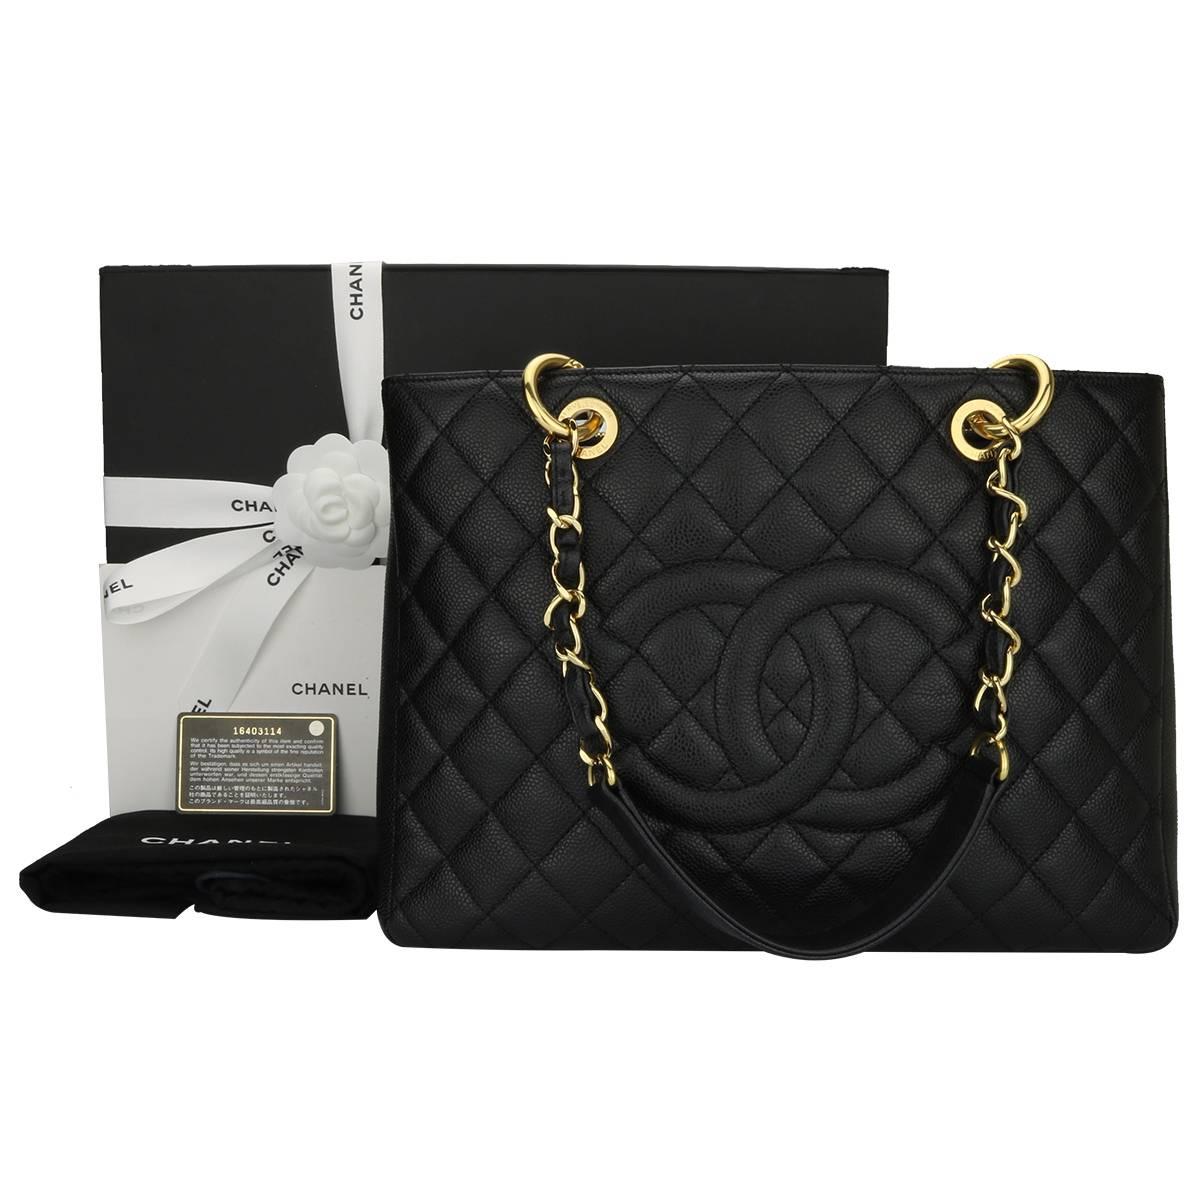 CHANEL Grand Shopping Tote (GST) Black Caviar with Gold Hardware 2012 13